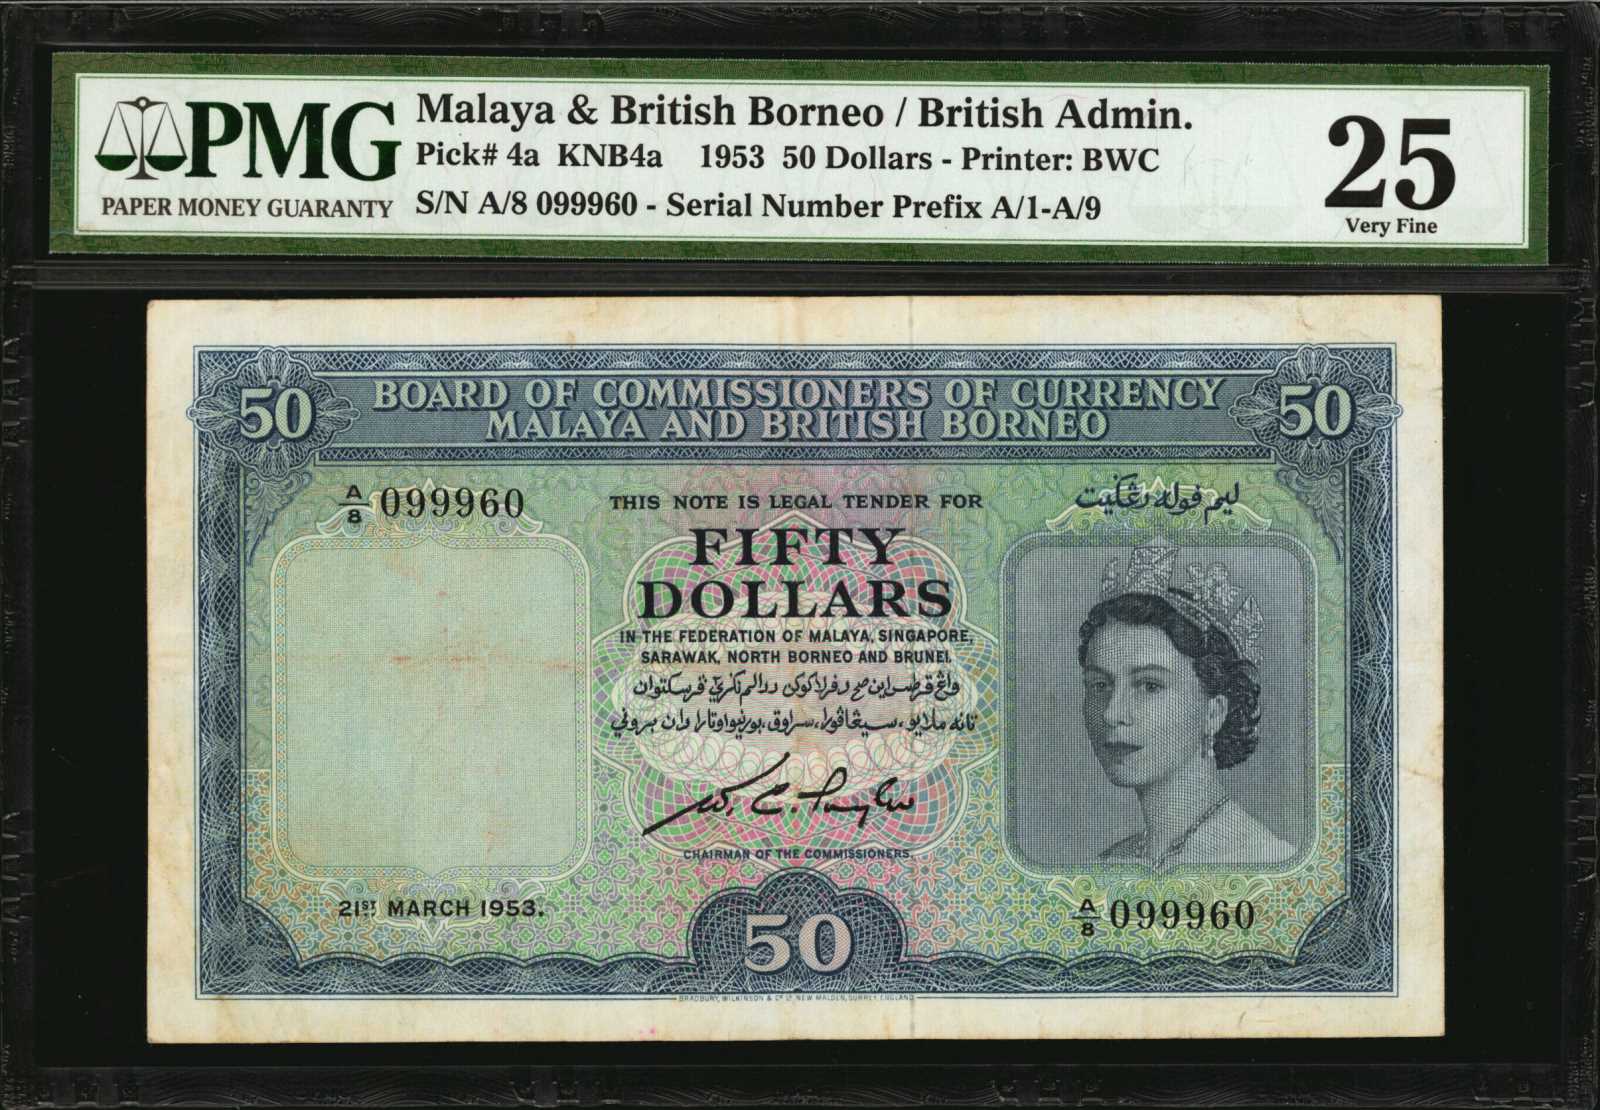 MALAYA AND BRITISH BORNEO. Board of Commissioners of Currency. 50